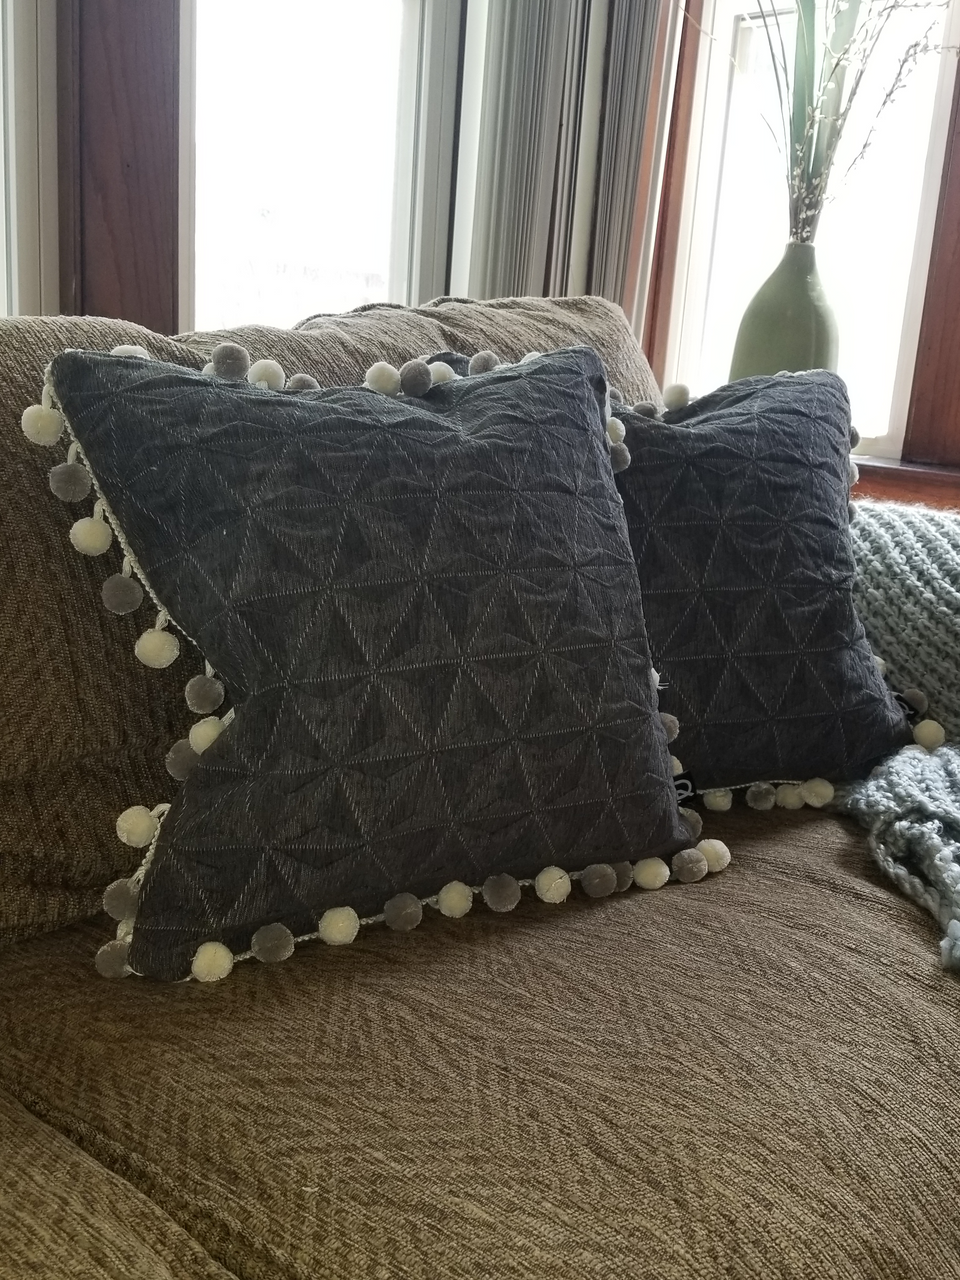 gray textured pillow covers with pom pom trim on taupe couch with knitted gray throw cover